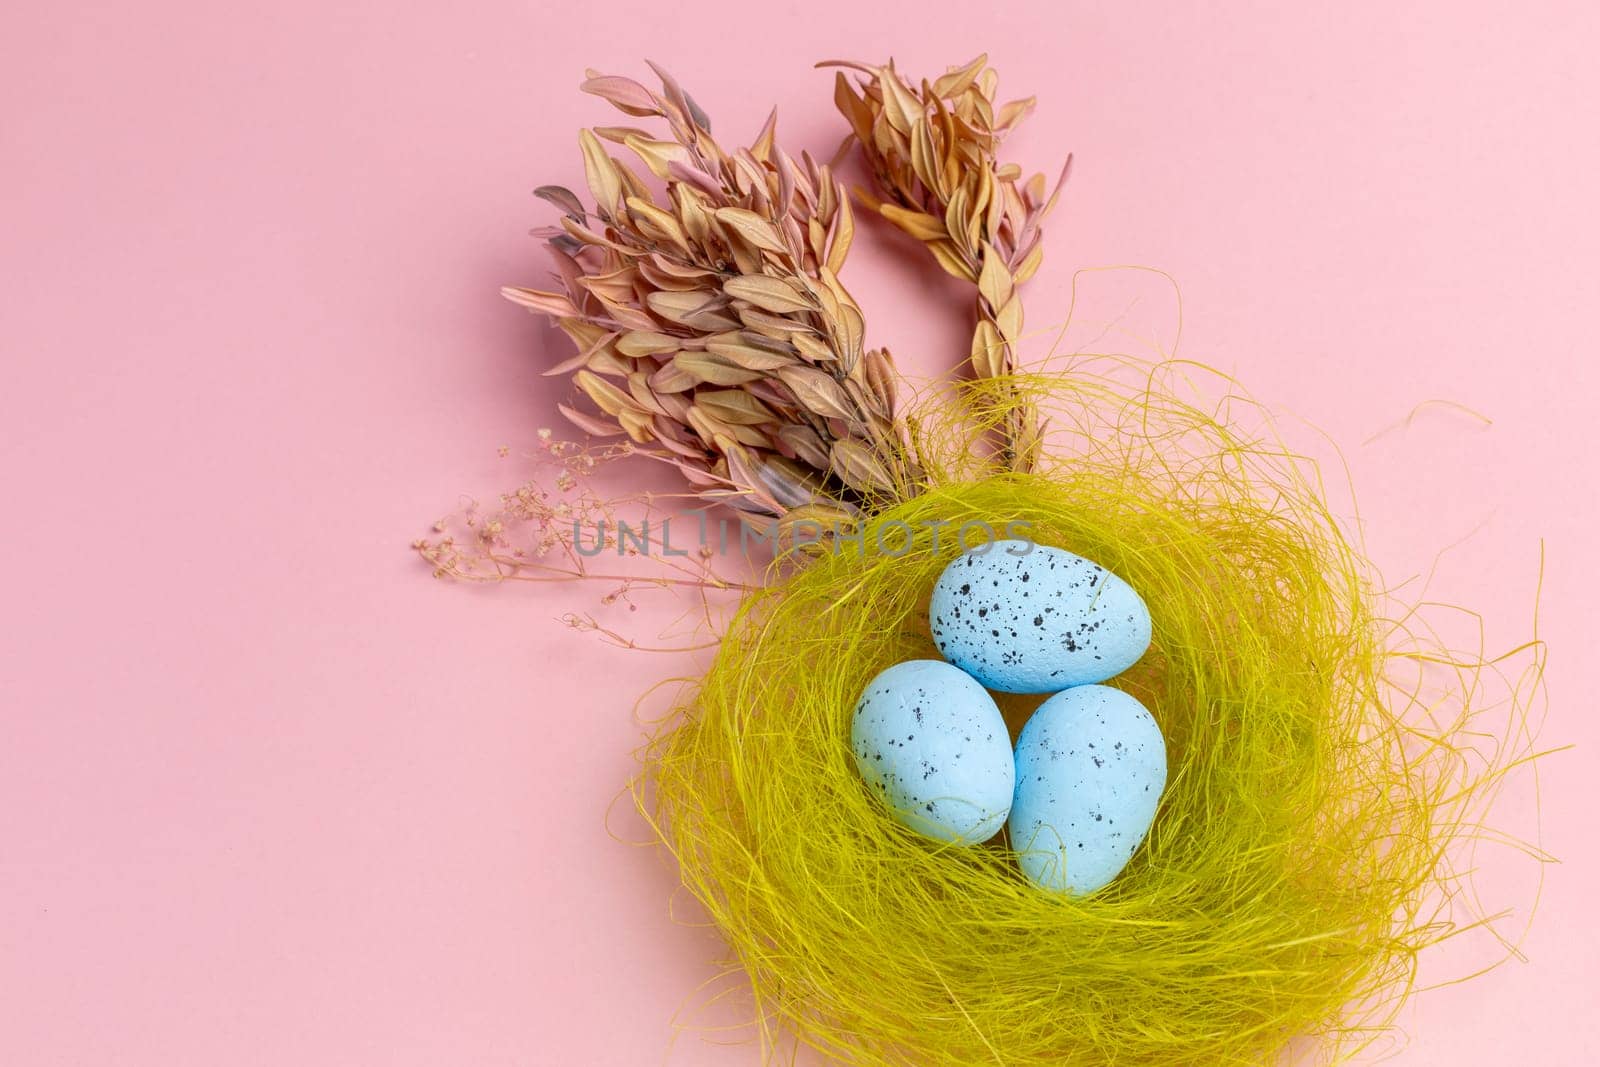 Nest with colored Easter eggs on the pink background with decor plants. Top view.